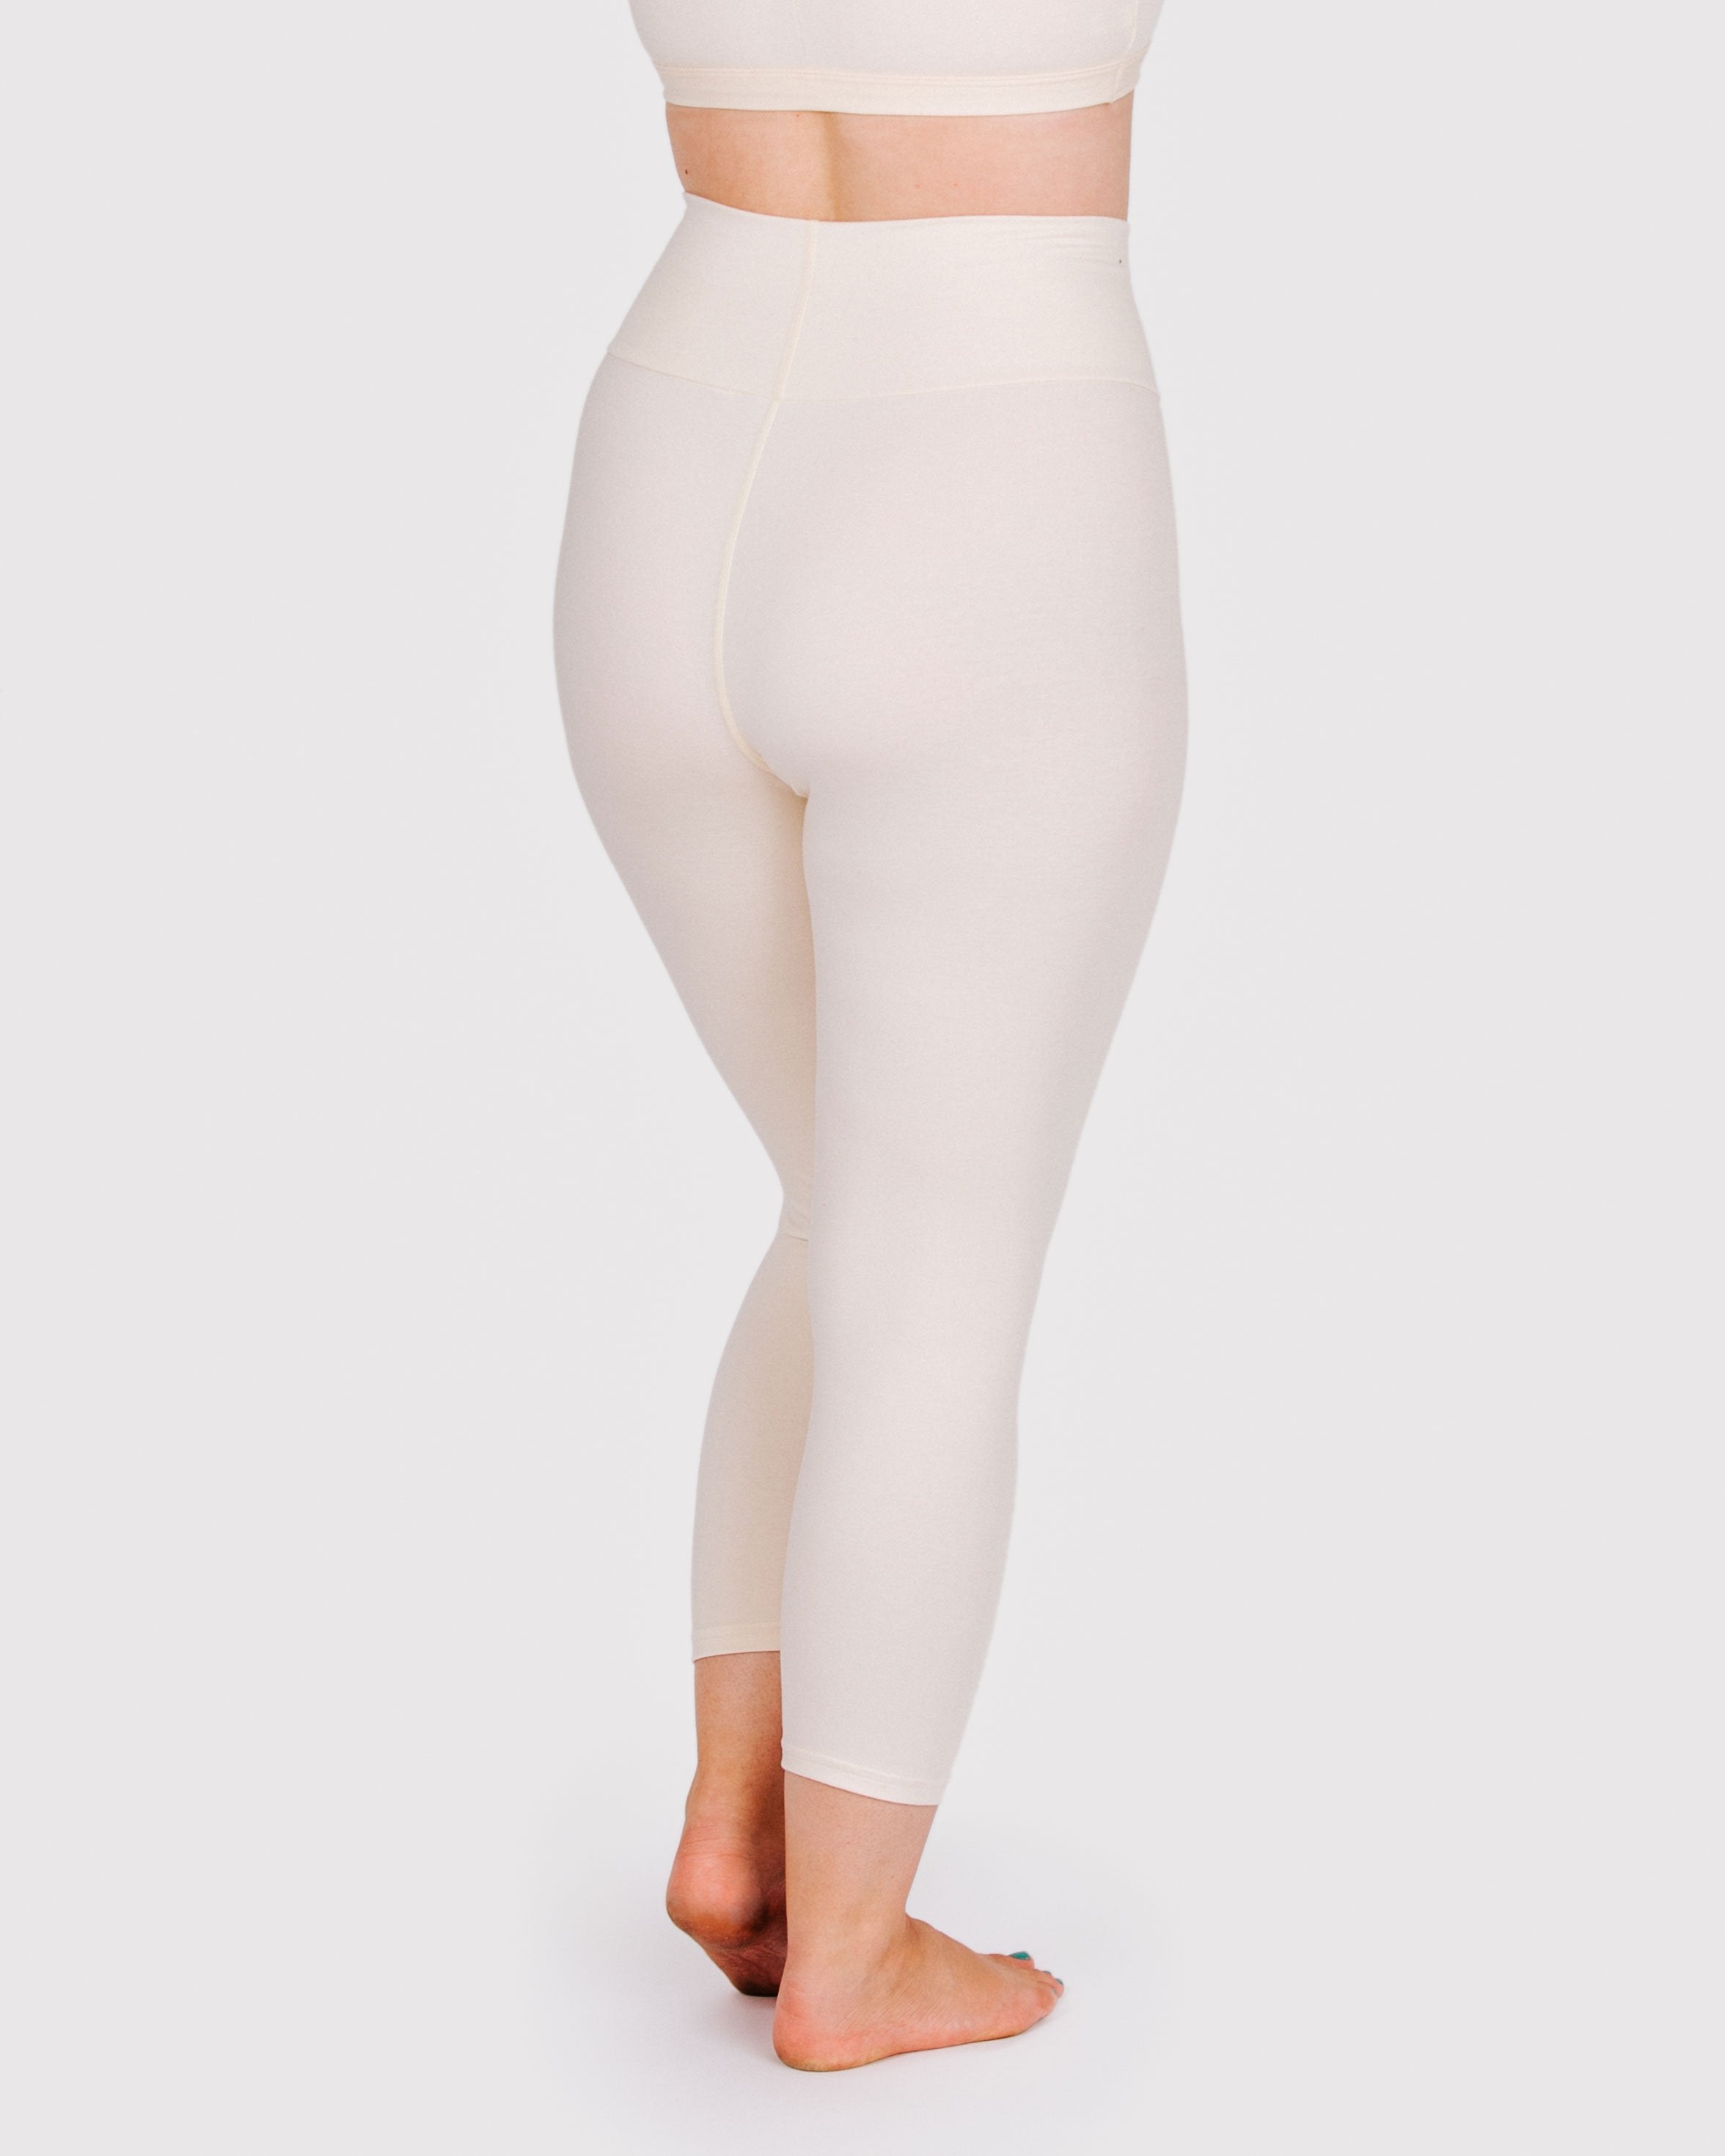 Fit photo from the back of Thunderpants organic cotton 3/4 Length Leggings in off-white on a model.